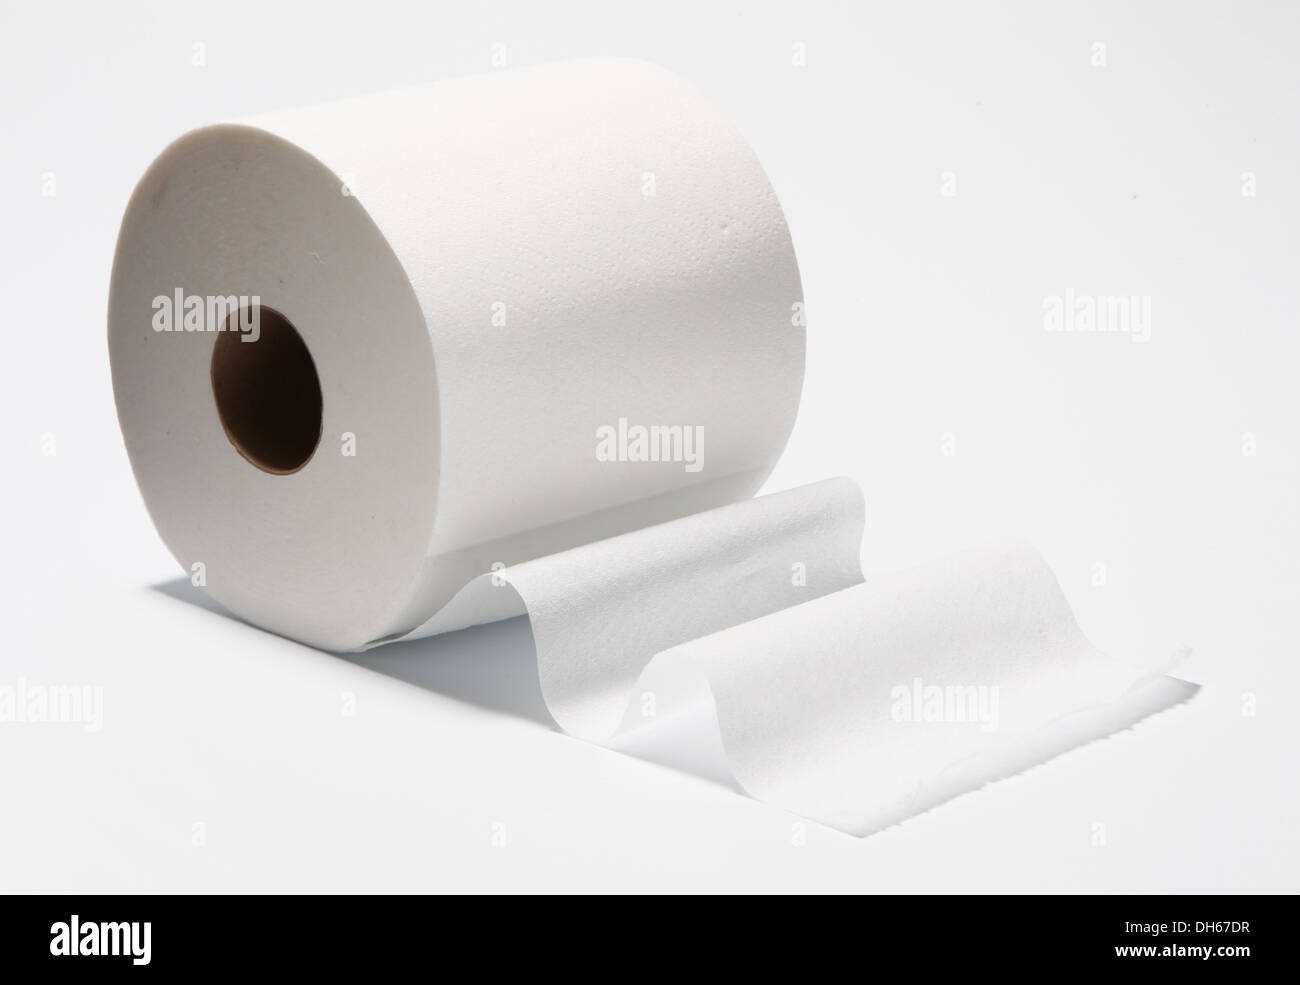 A slightly unrolled roll of white bathroom tissue / toilet paper Stock Photo